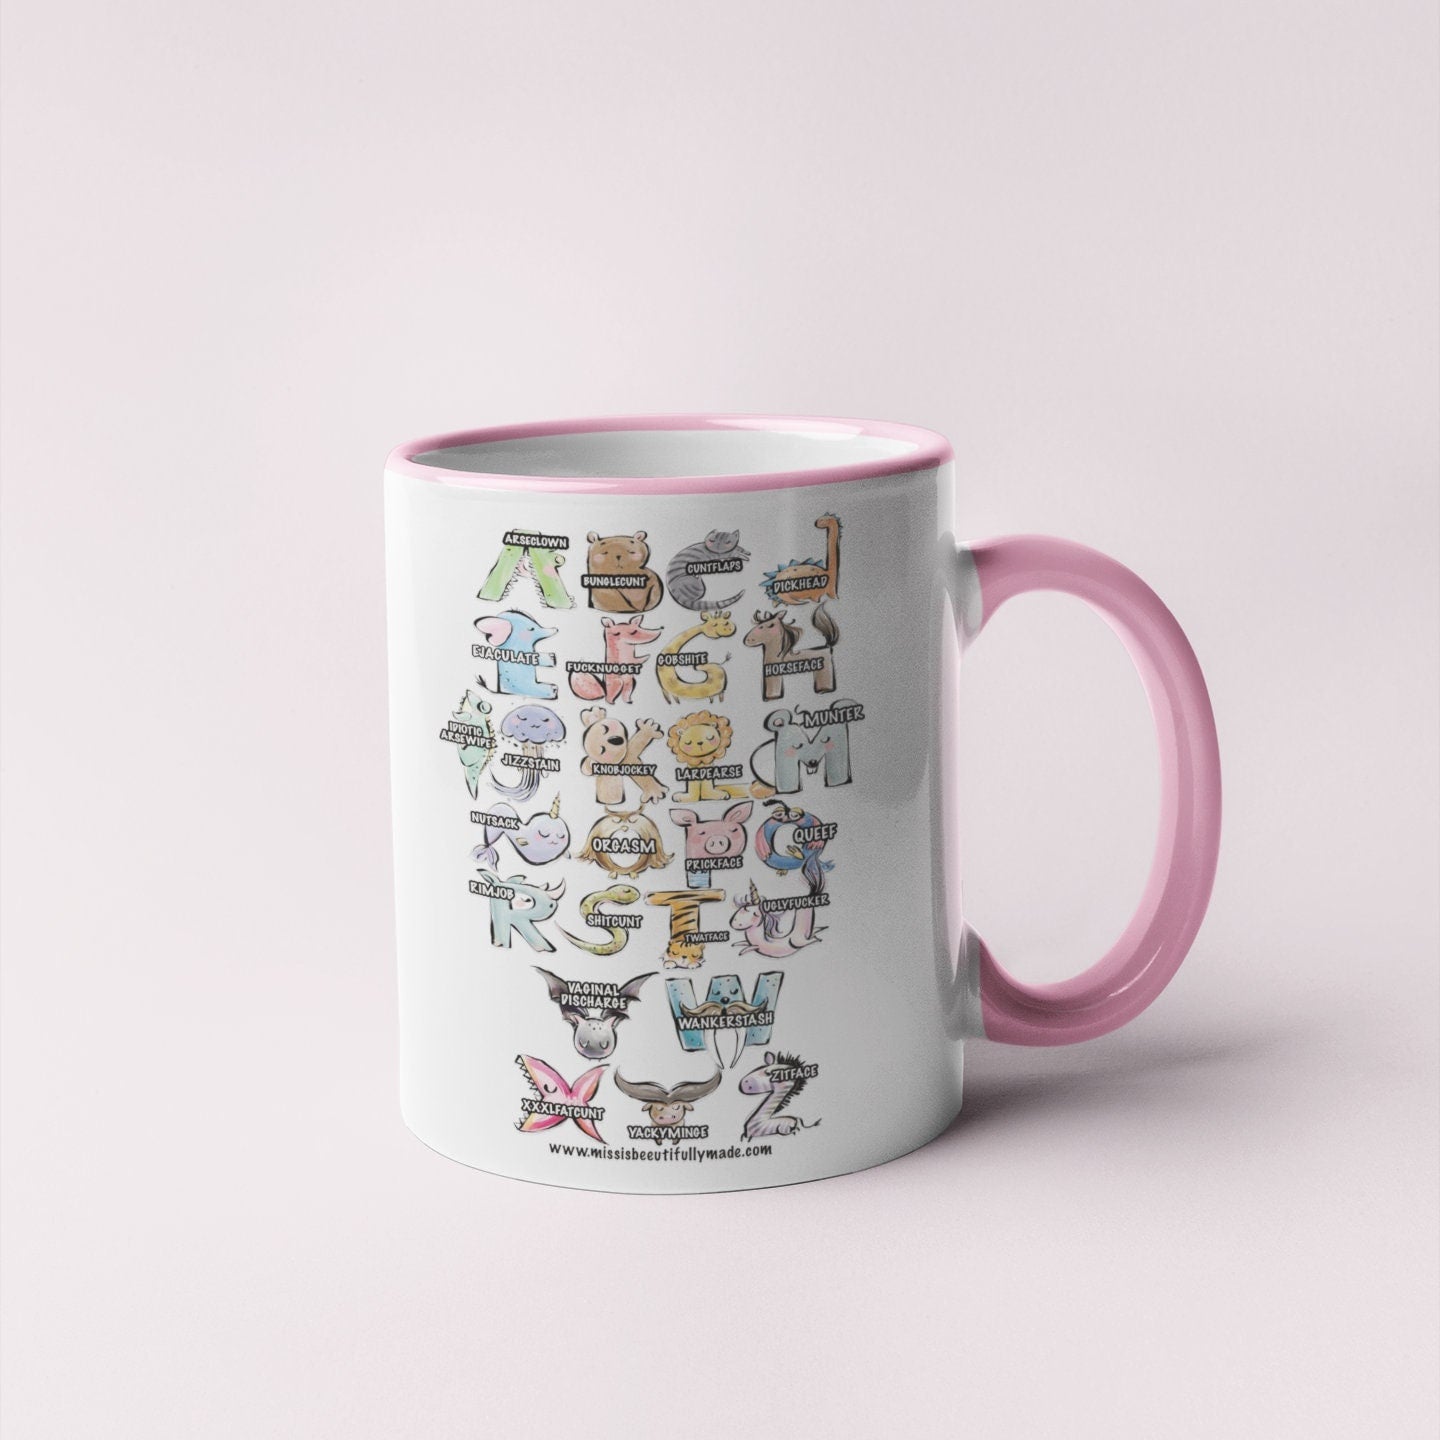 A white ceramic mug with a pink handle, featuring a fun, colourful, animal alphabet. A is for arseclown, B is for bunglec*nt etc.